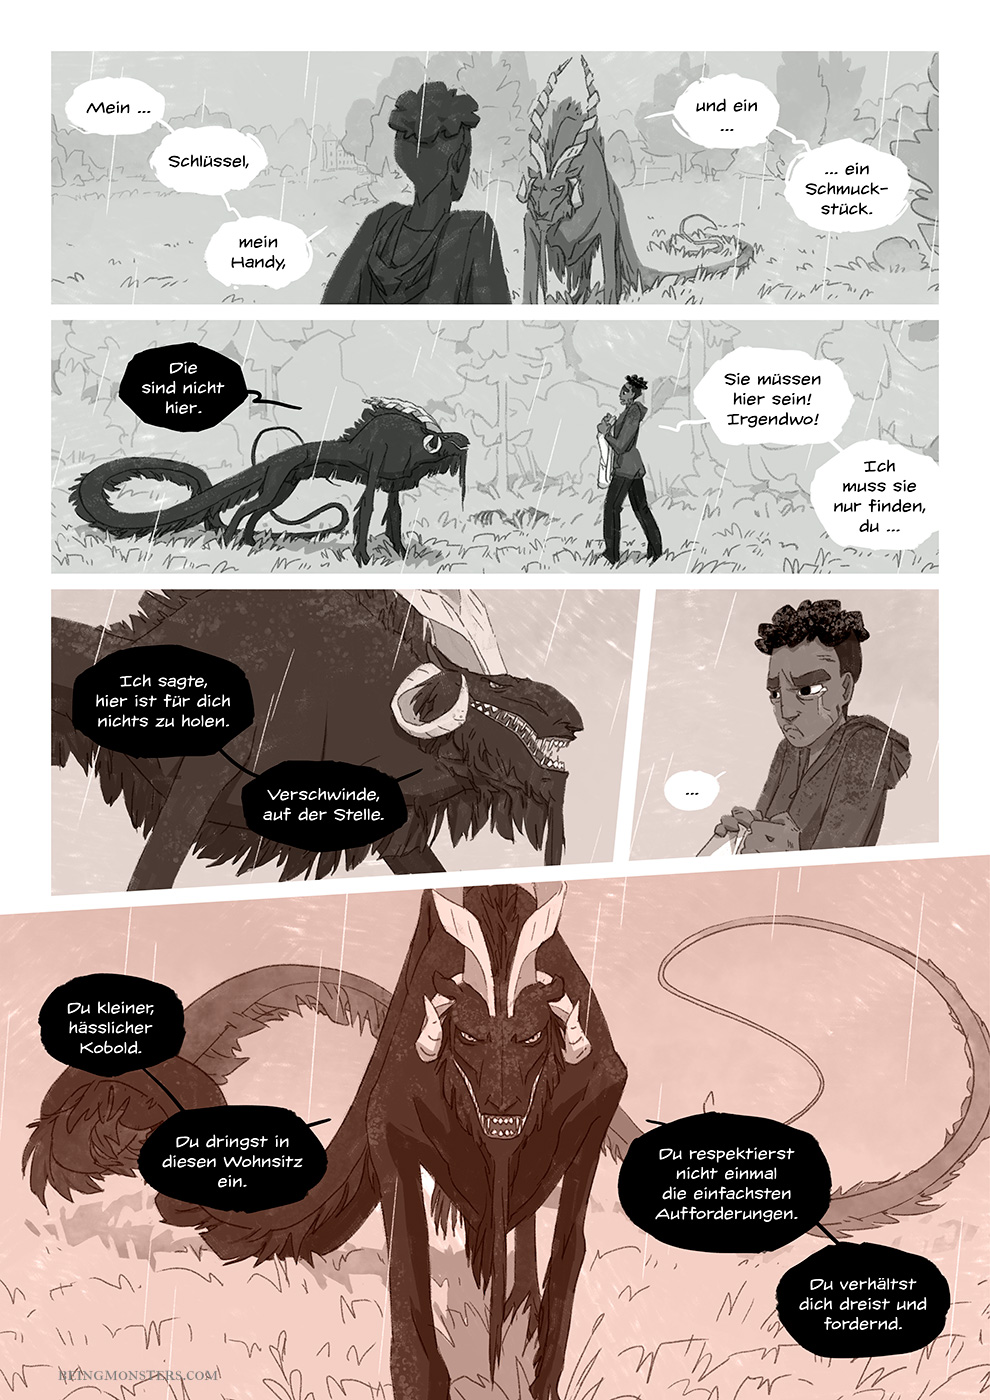 Being Monsters Book 1 Chapter 5 Page 18 EN